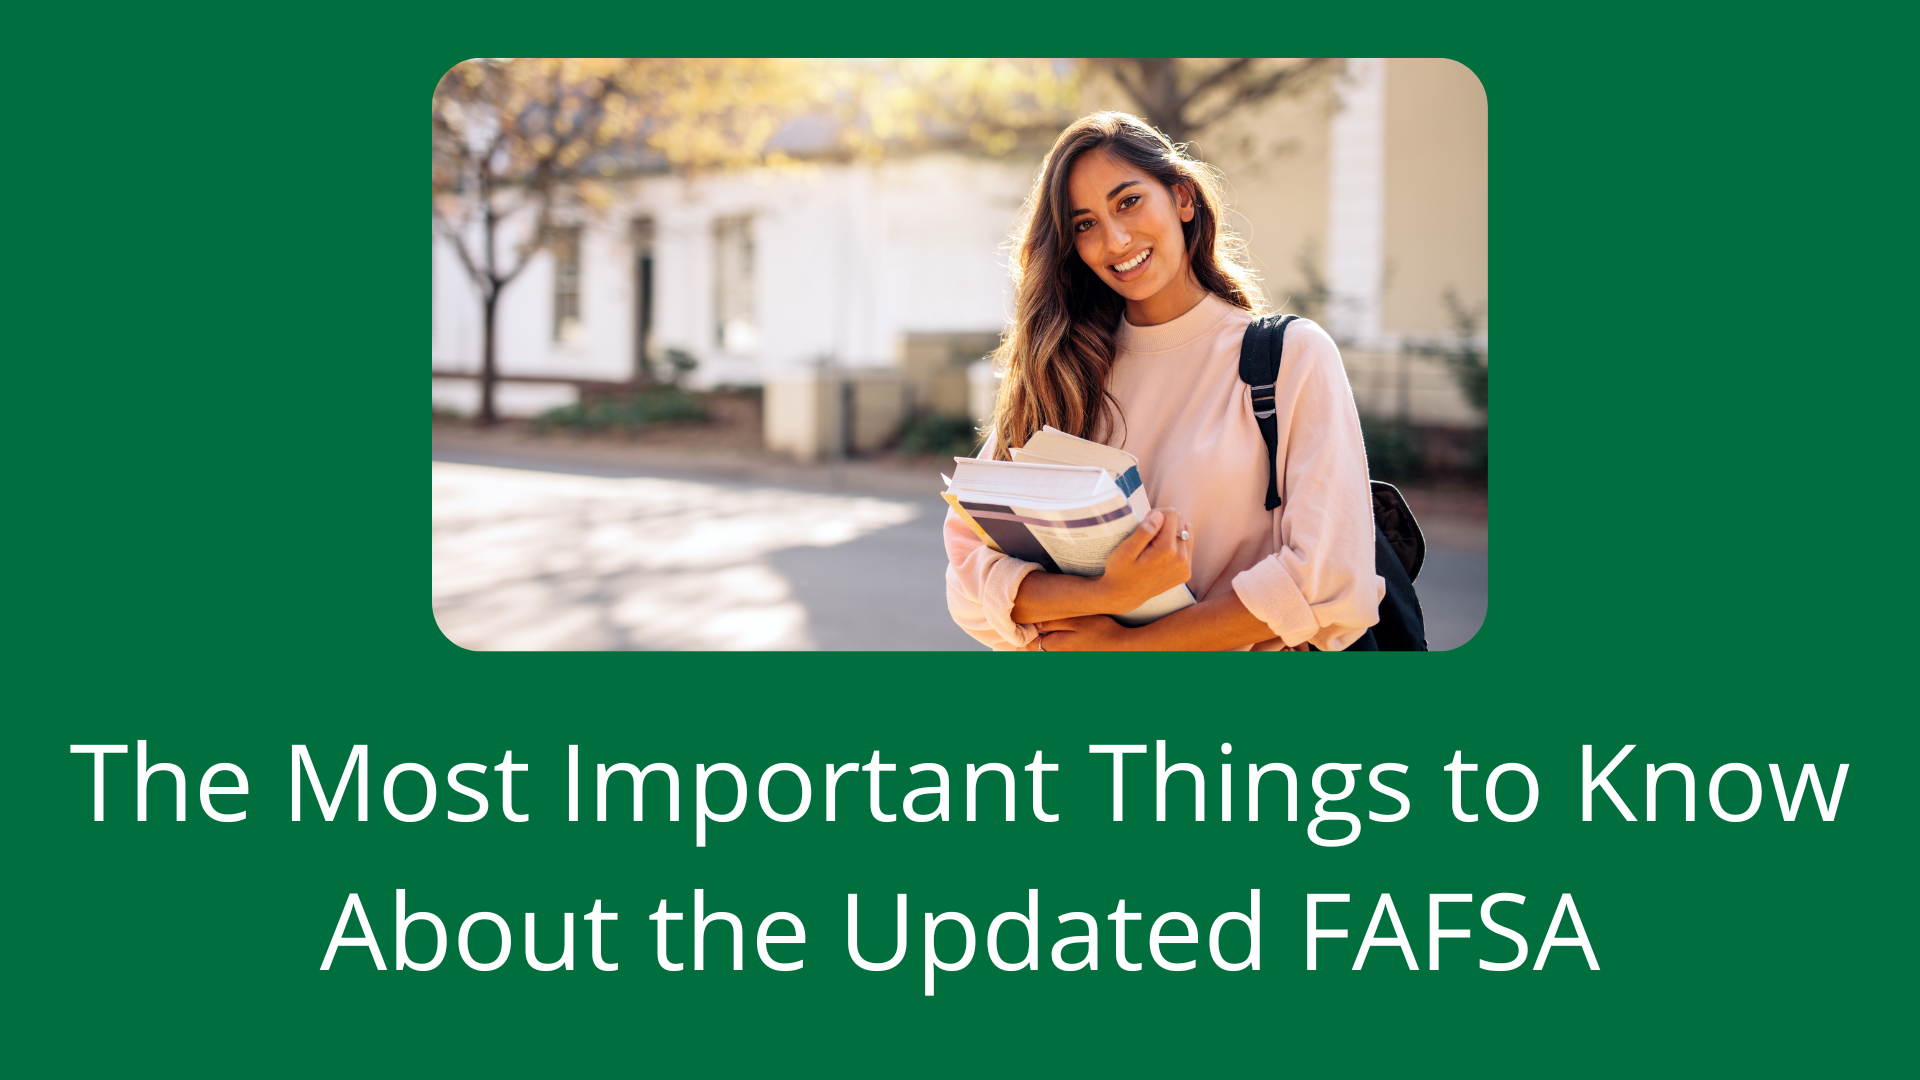 What to know about the updated FAFSA